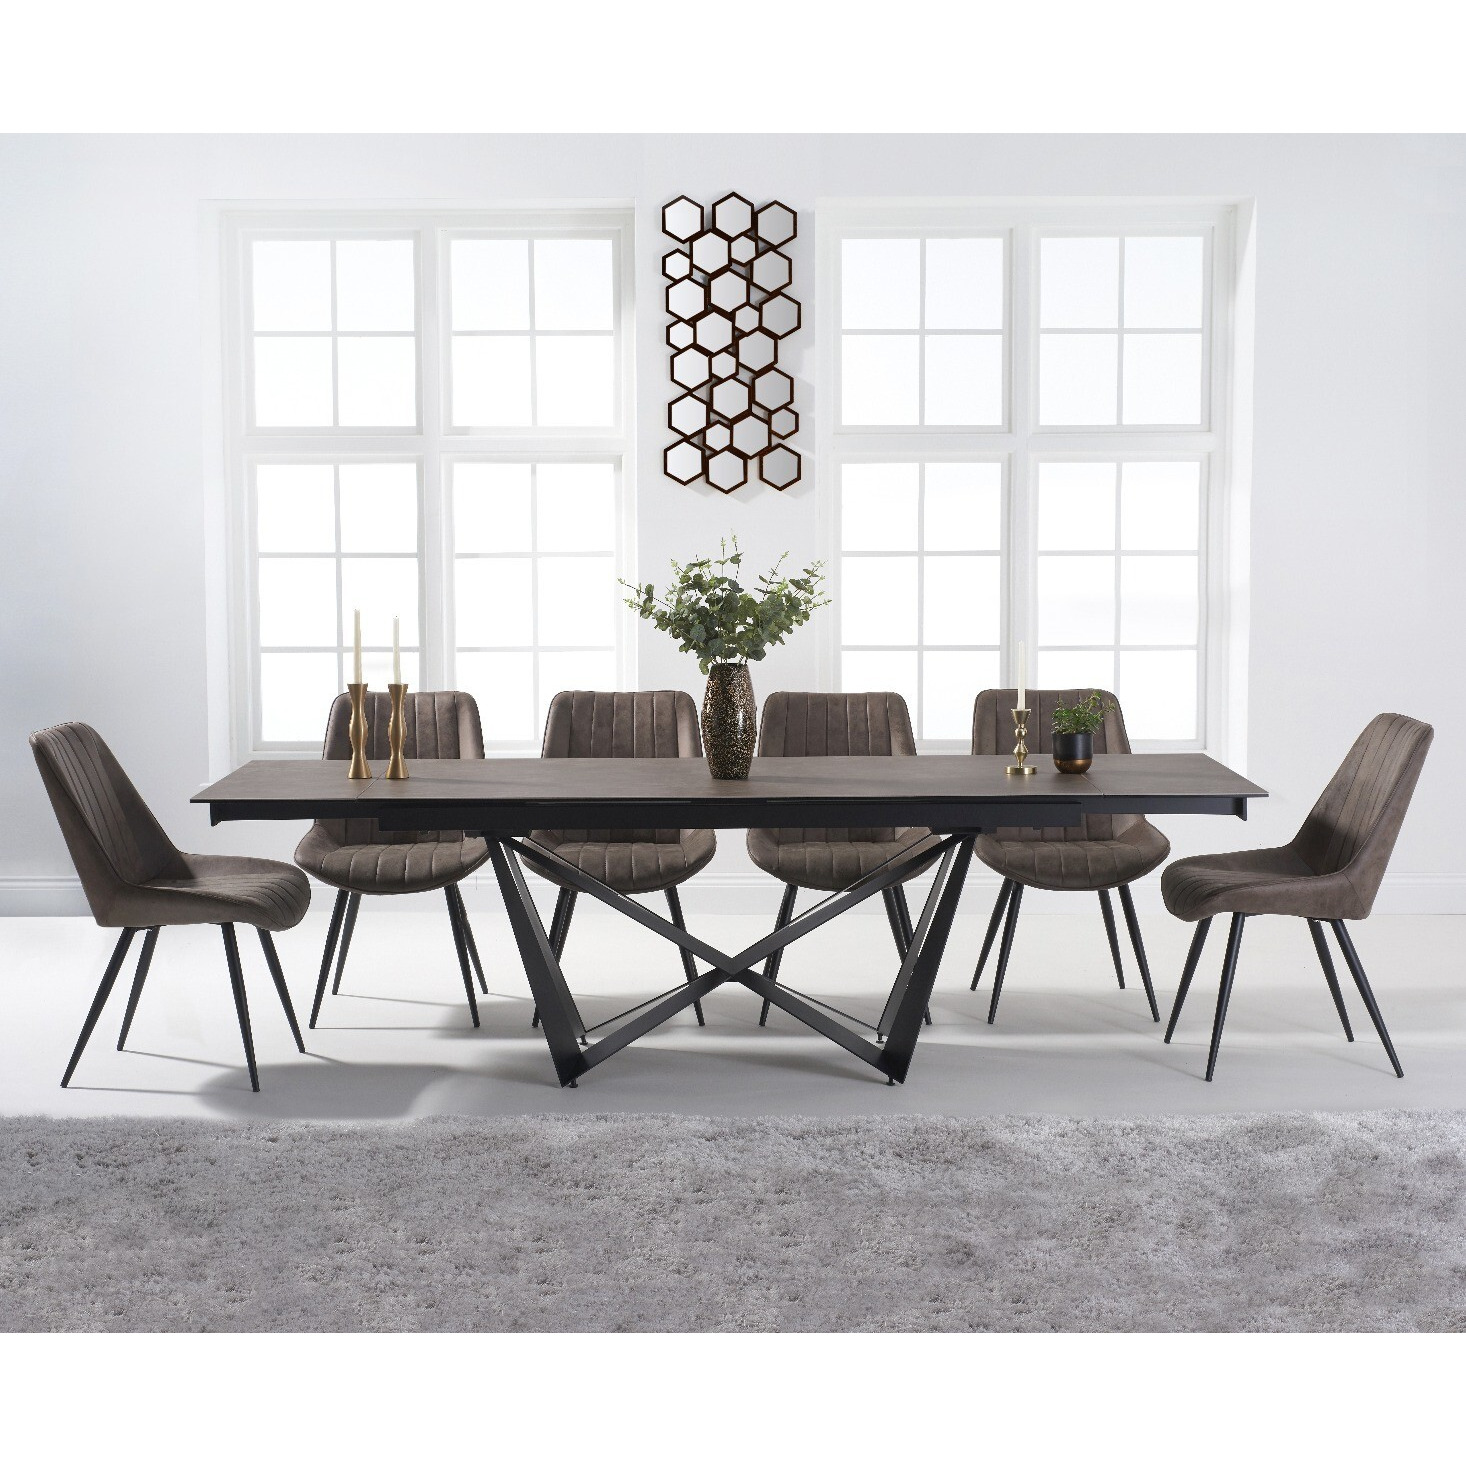 Blenheim 180cm Mink Ceramic Dining Table With 6 Brown Marcel Antique Chairs